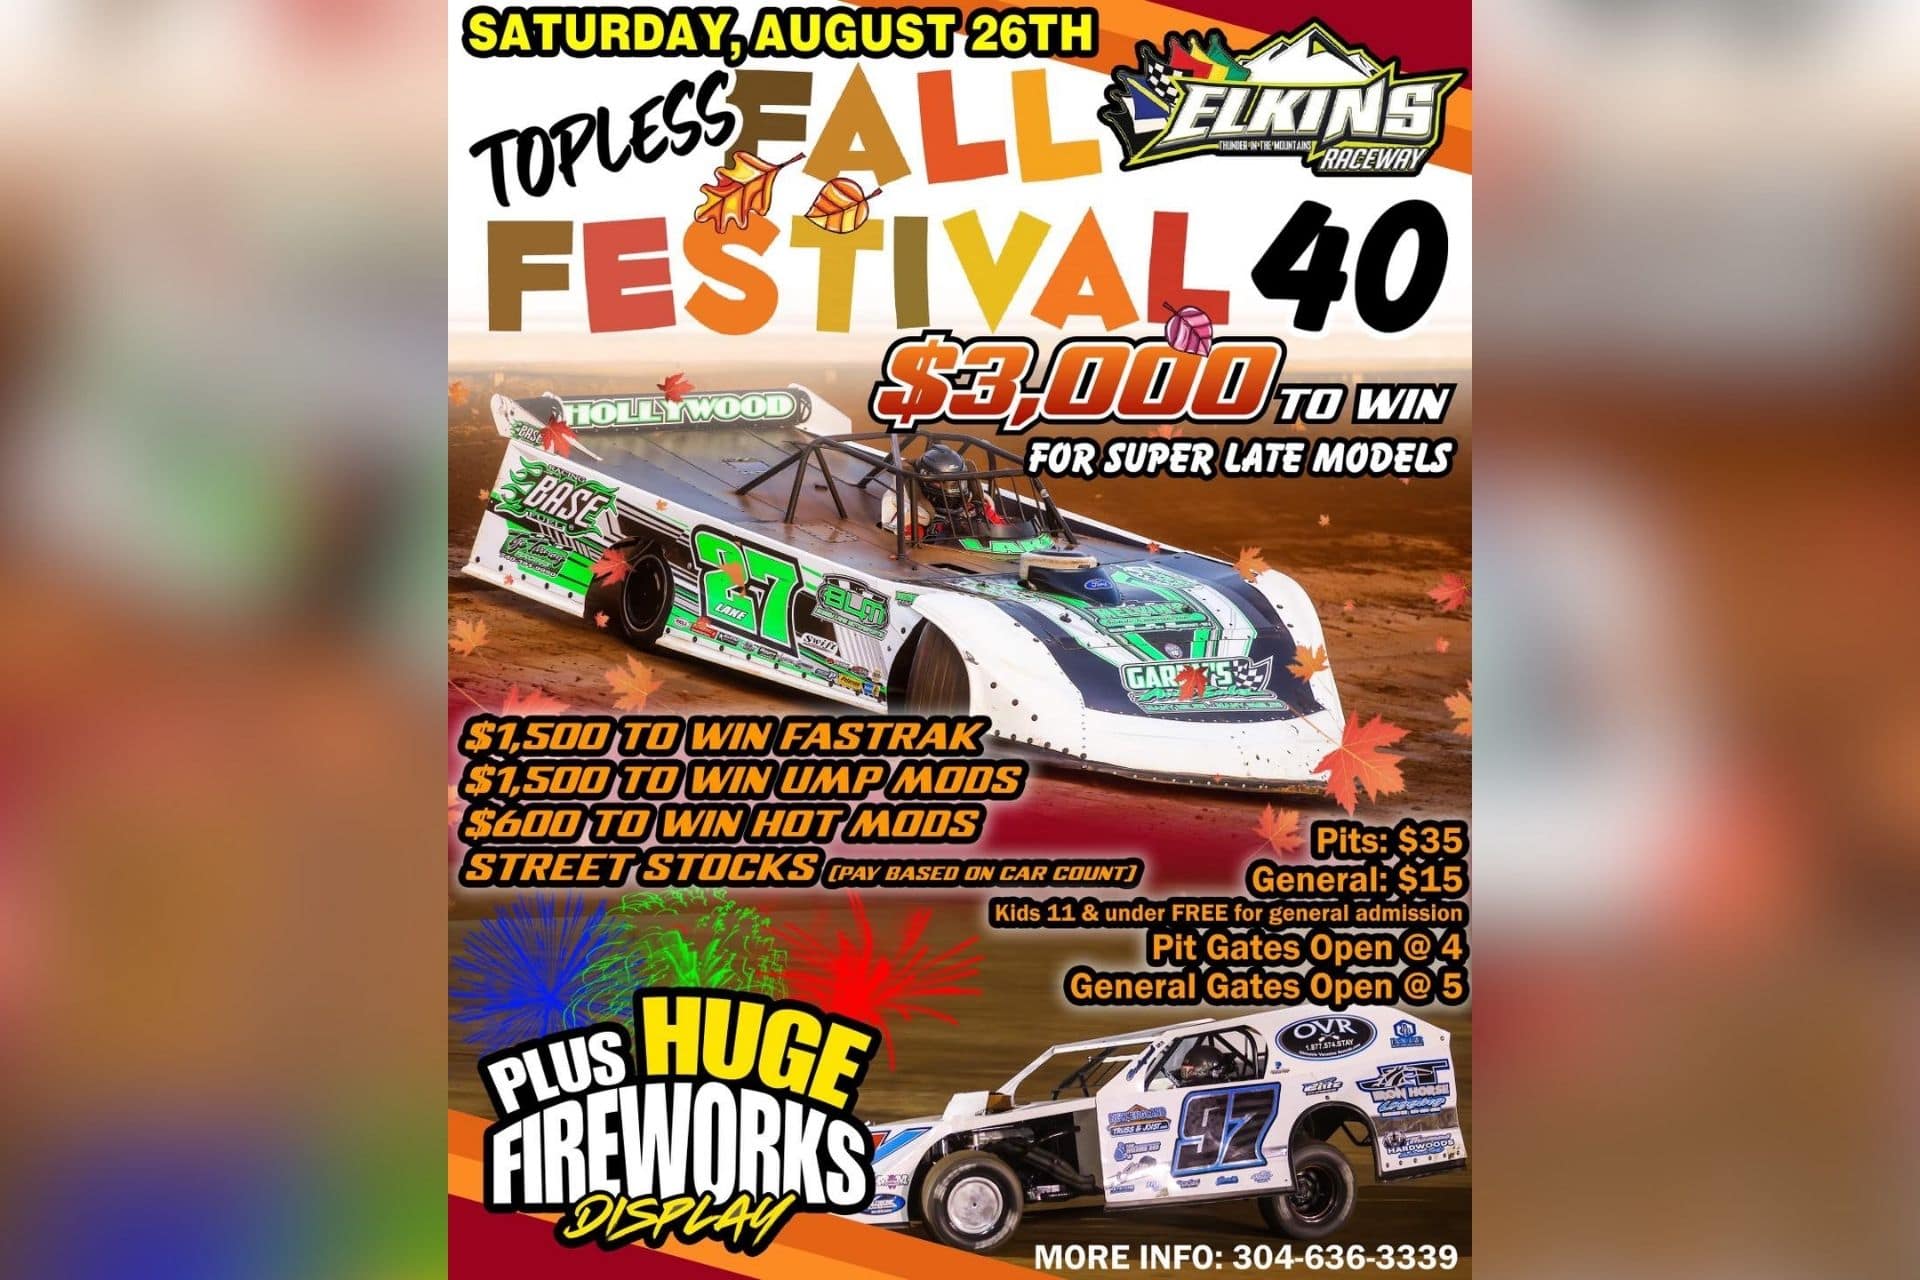 Northern Recollection Datum Elkins Raceway Fall Festival coming this weekend